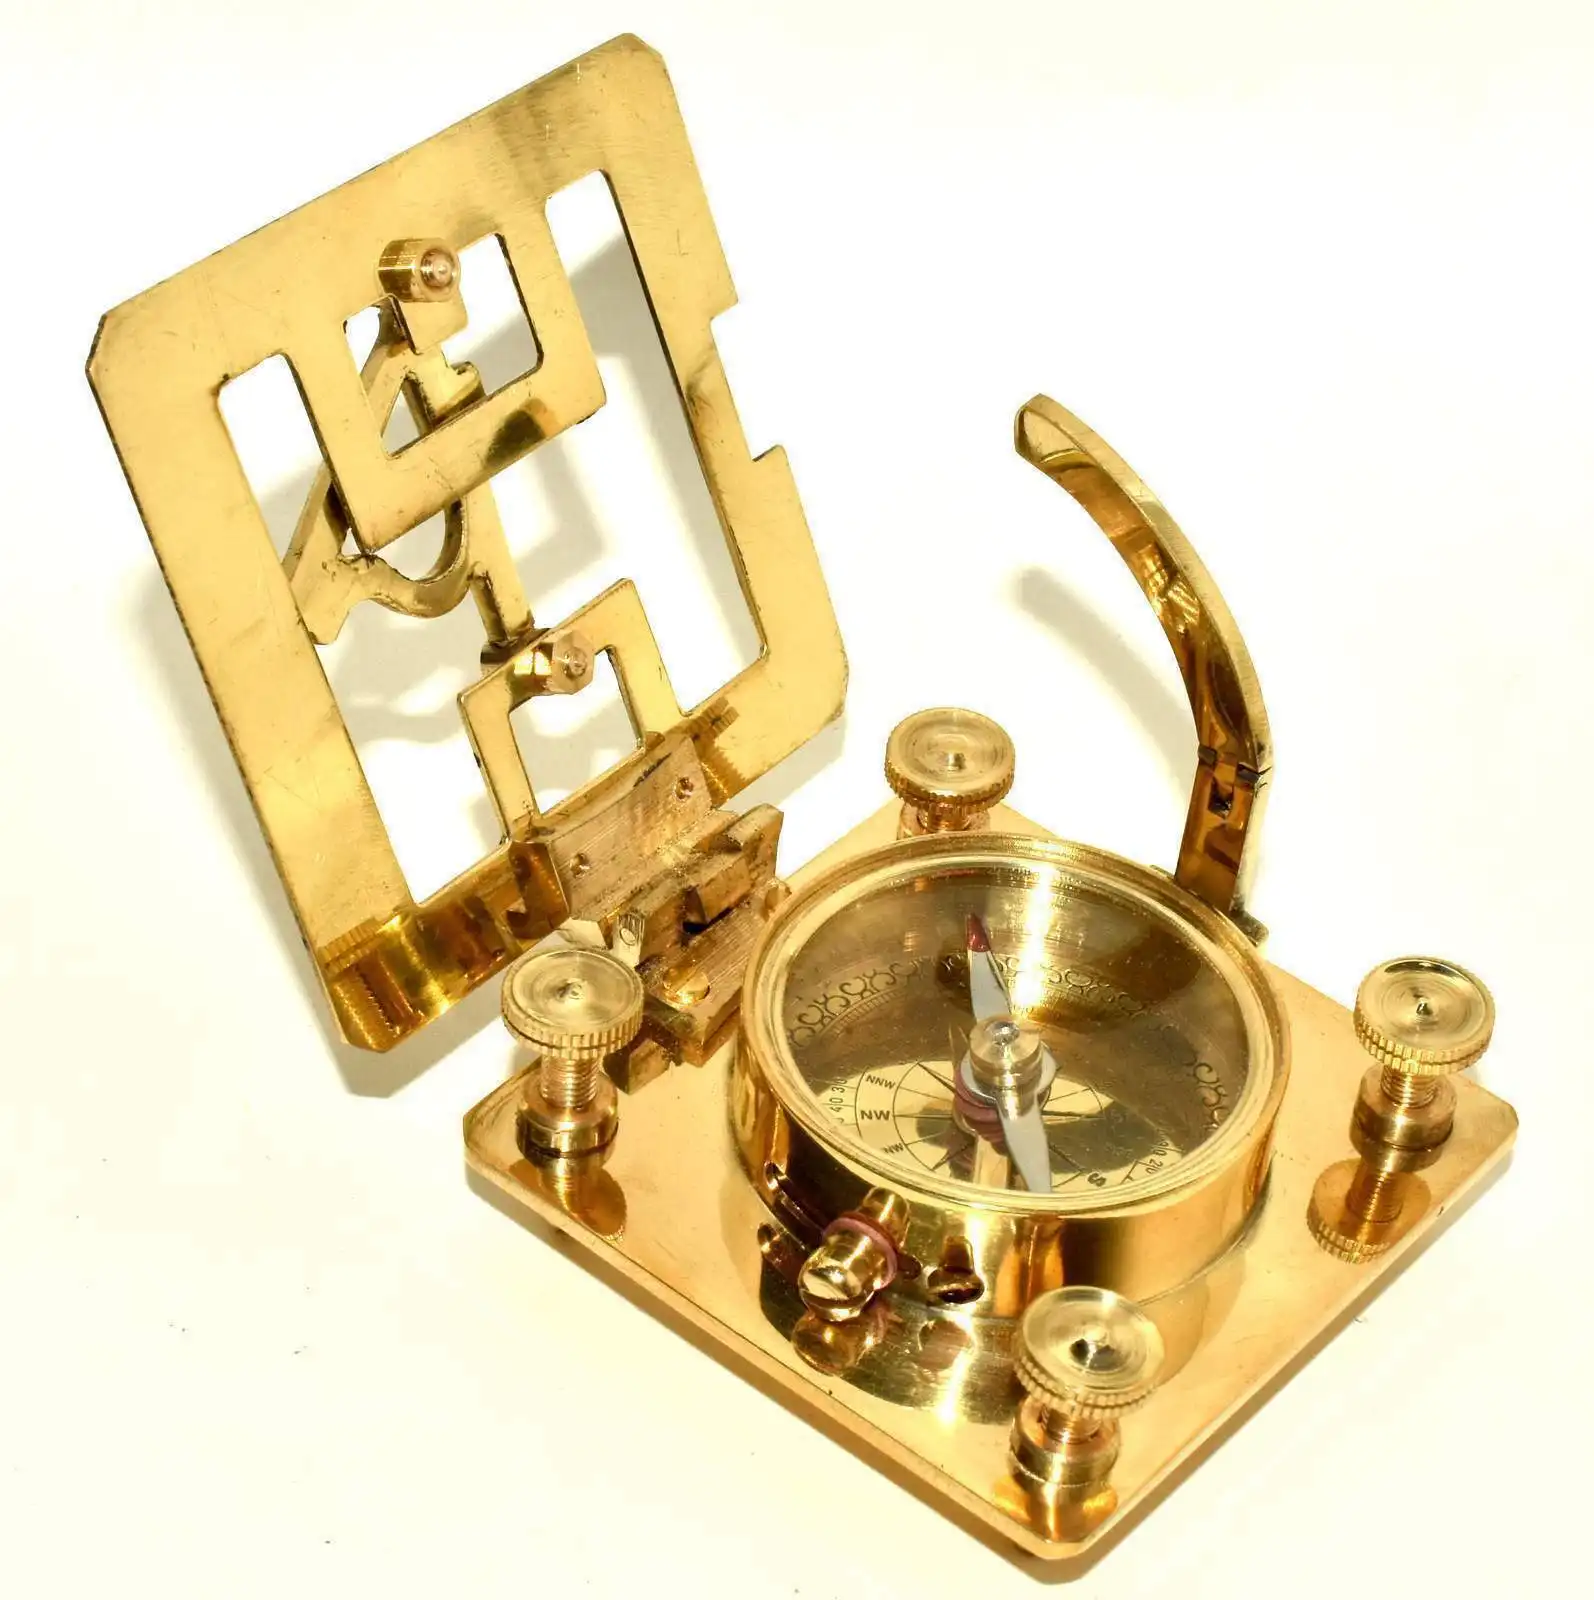 Brass Sundial Compass Marine Working Compass Pocket Style Collectible Decorative Item